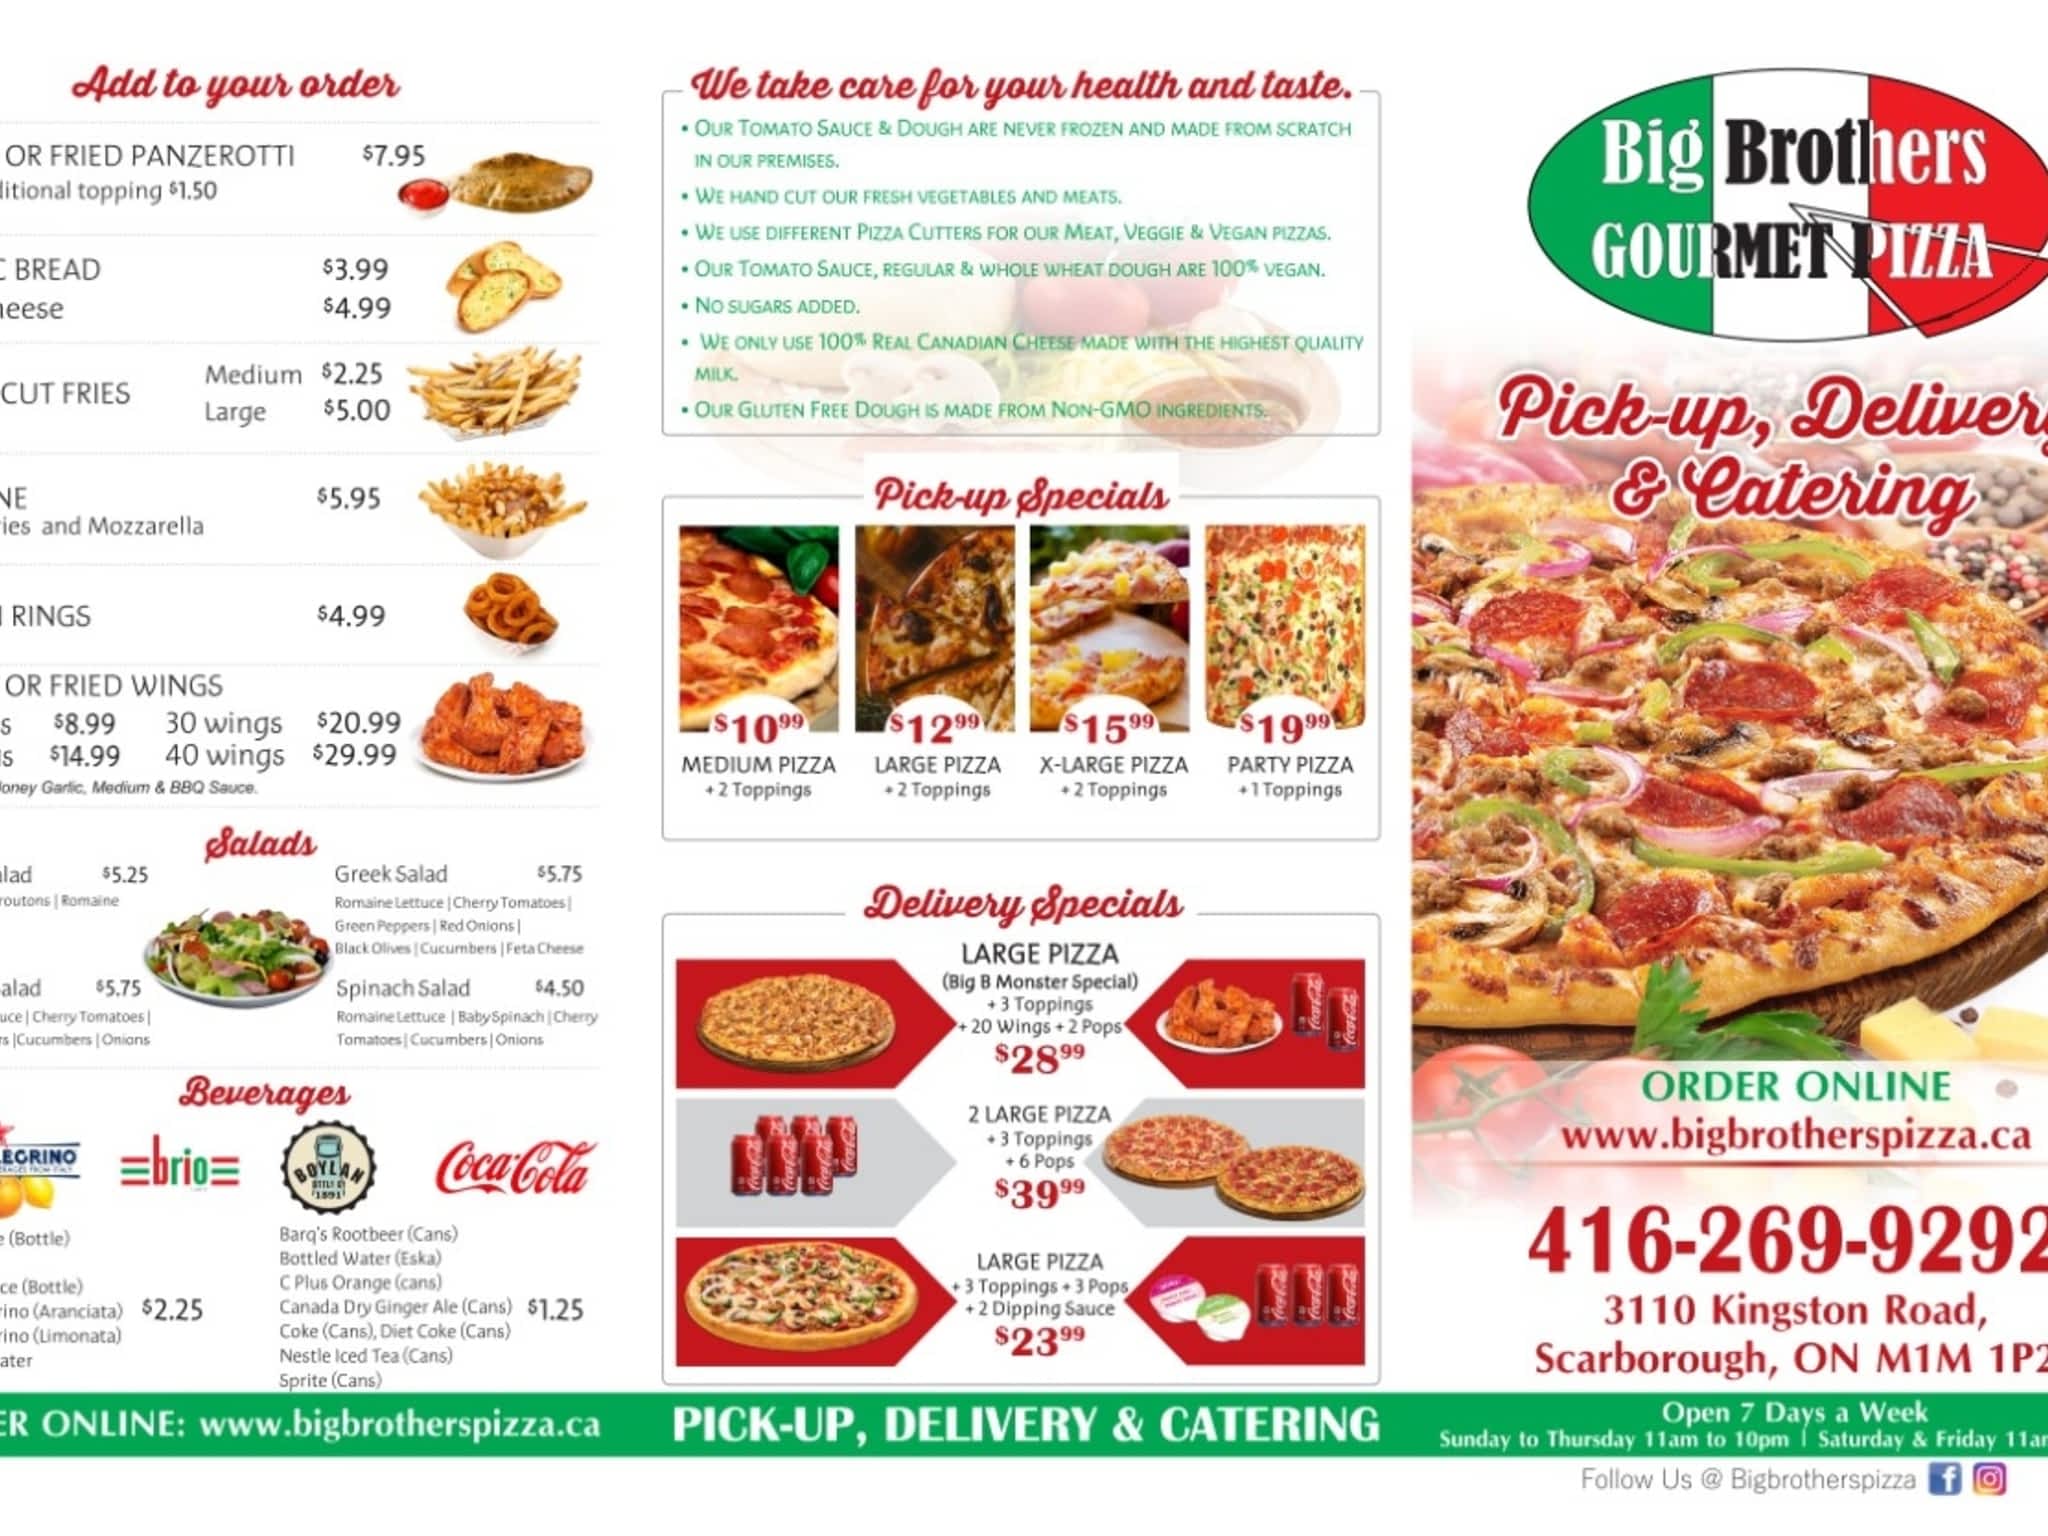 photo Big Brothers Gourmet Pizza